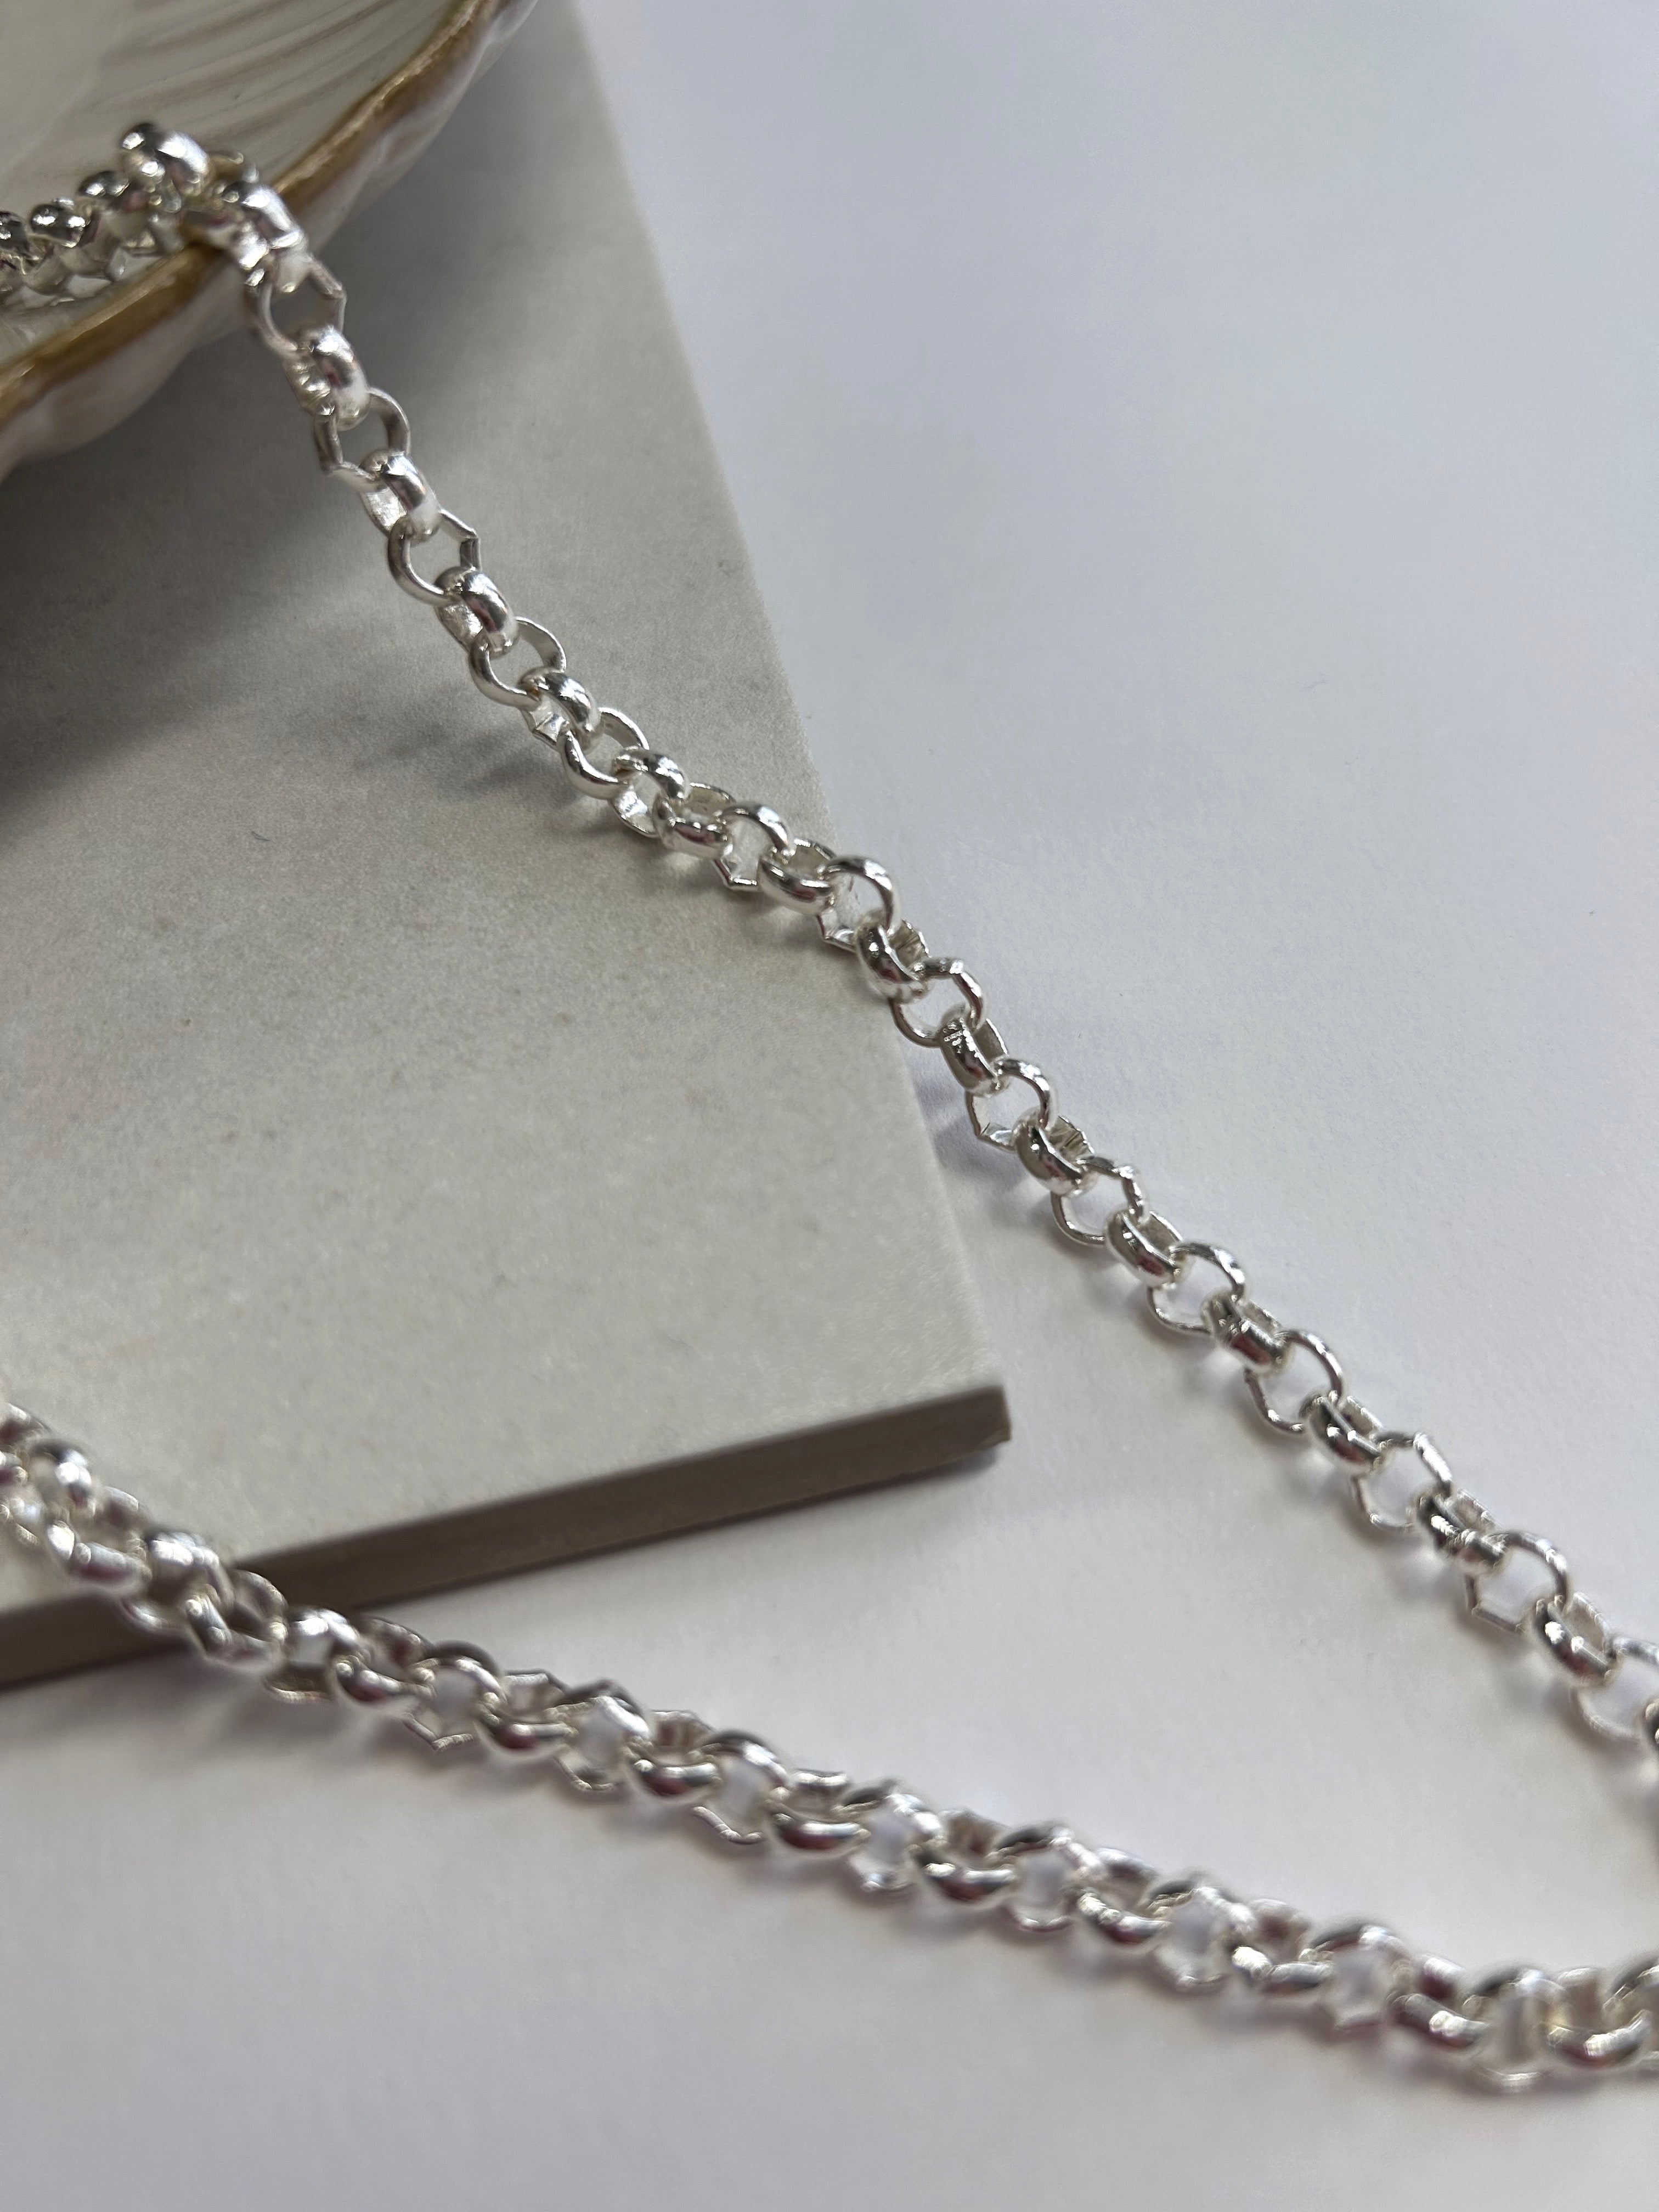 Silver Plated Belcher Chain Necklace - 15"